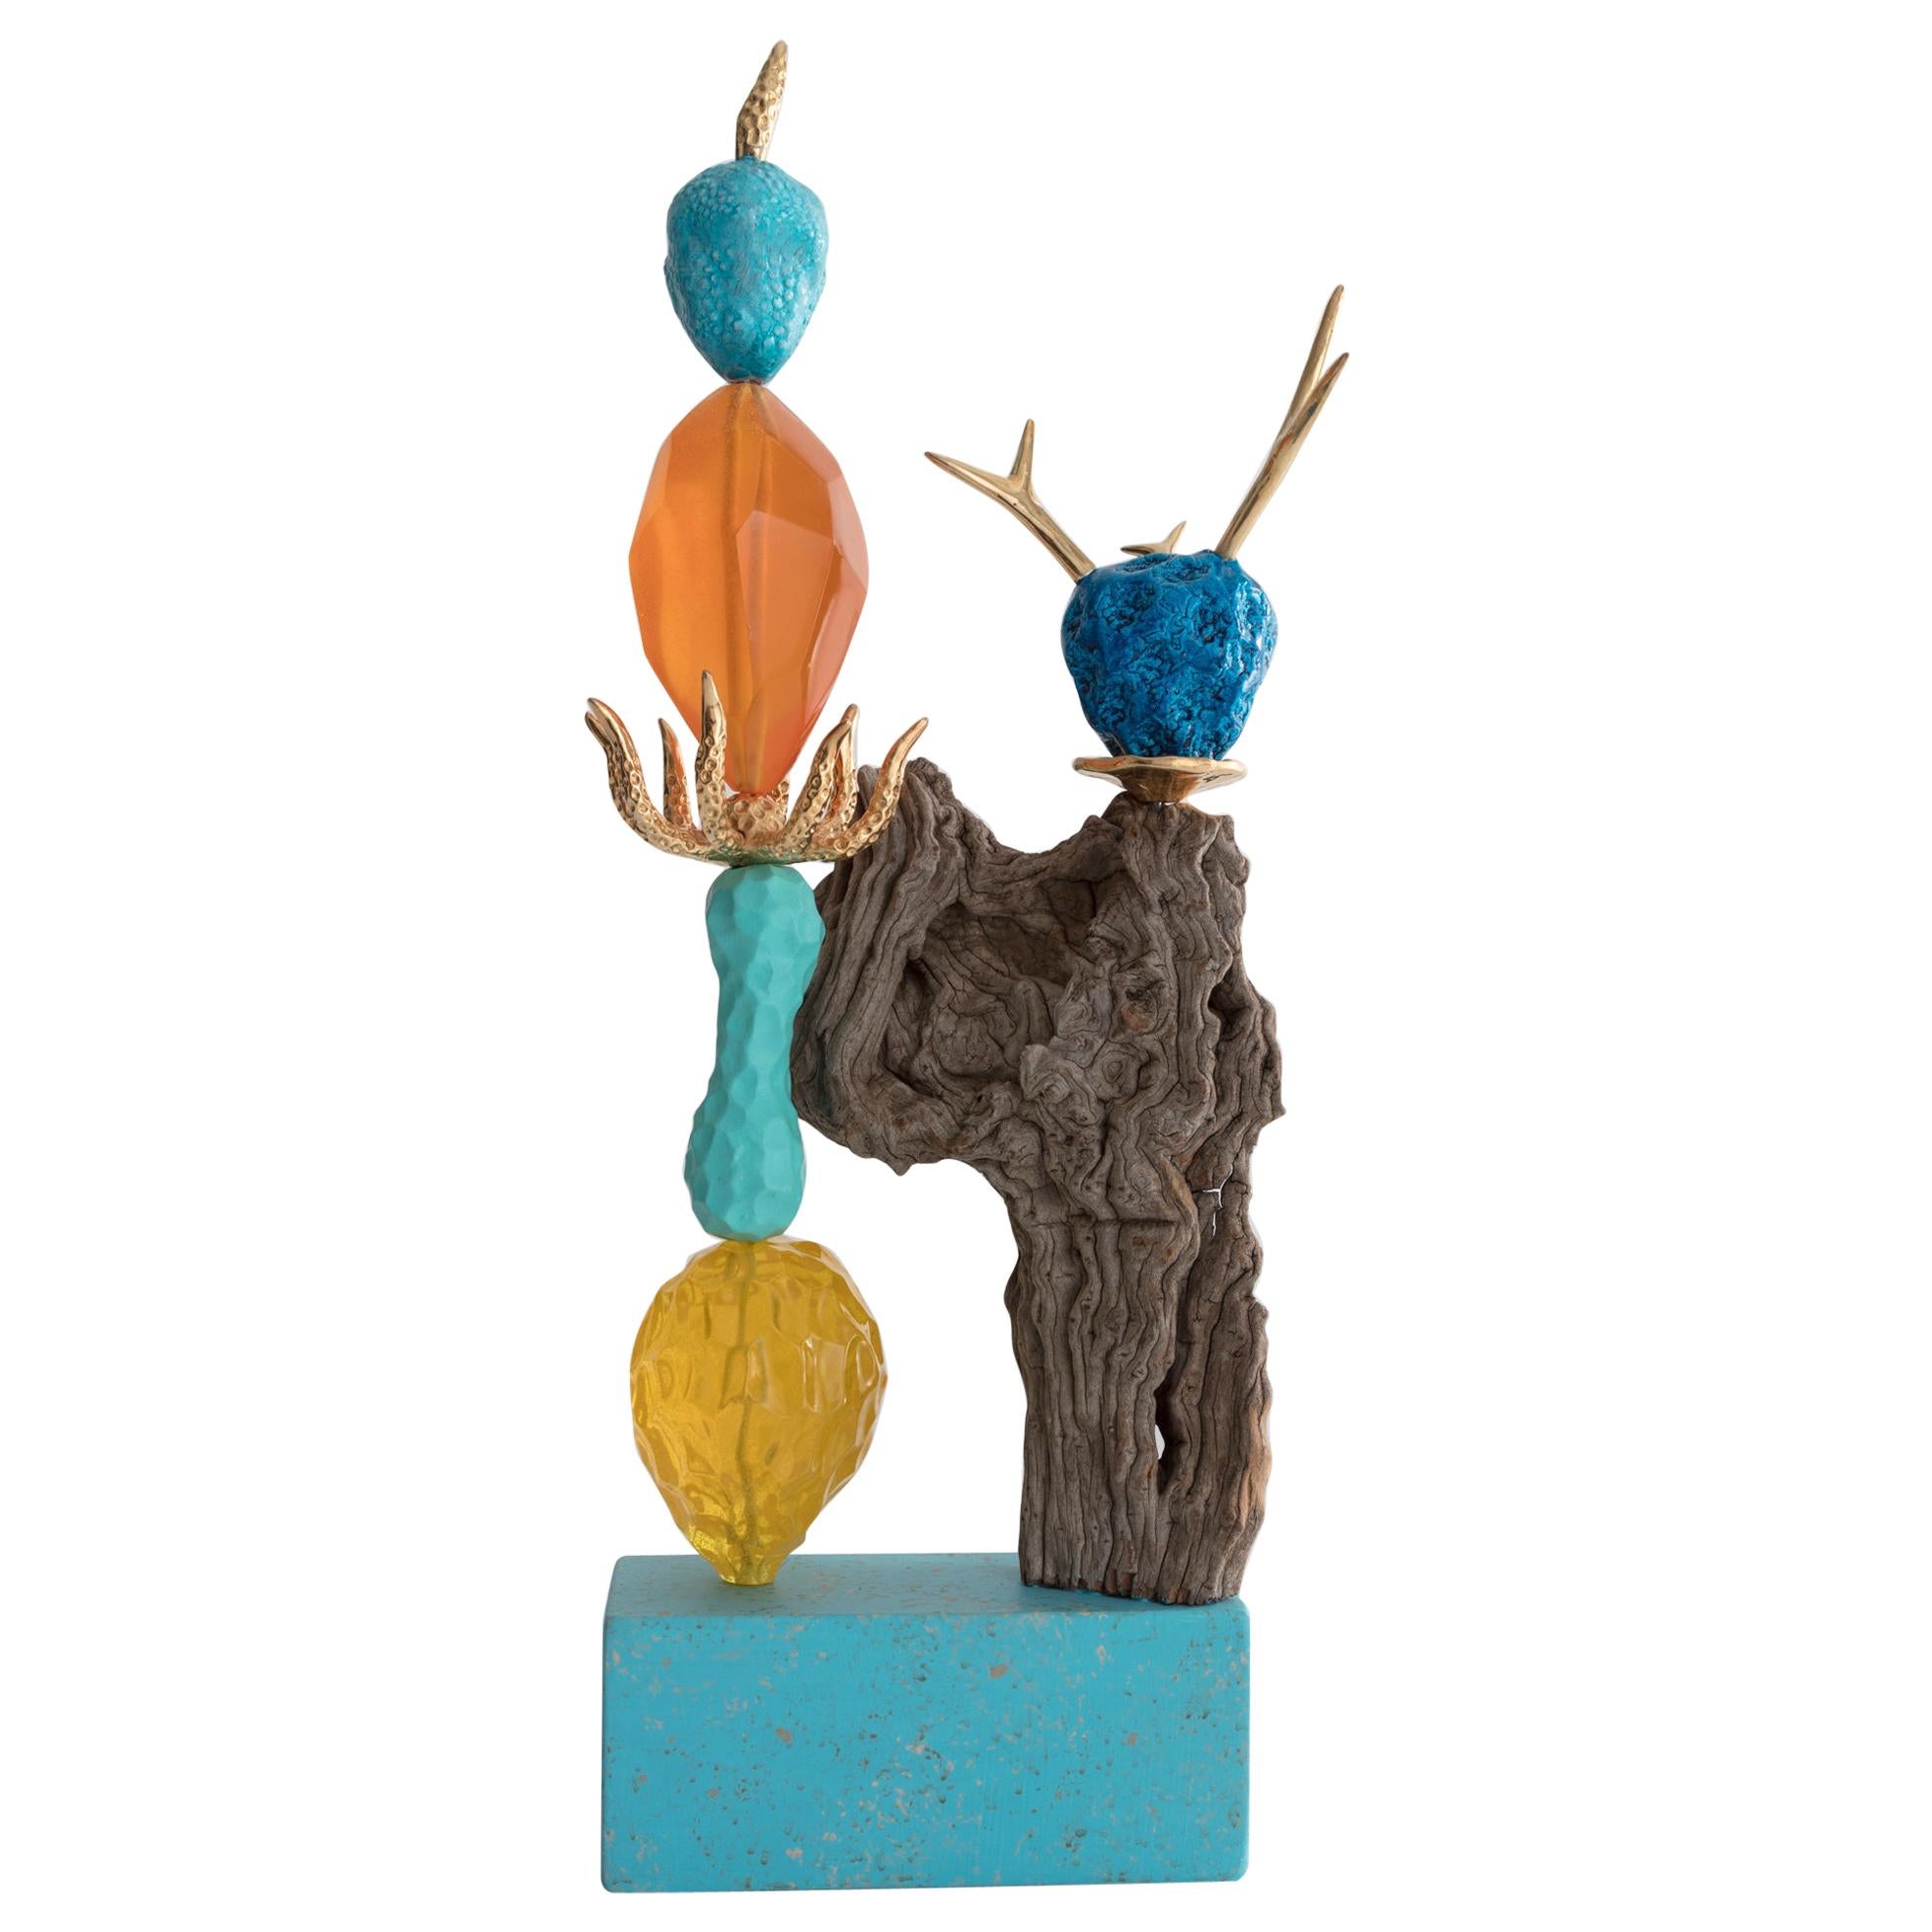 Kuni TOTEM Sculpture in Clay and Resin with Wooden Base by Ashley Hicks, 2018